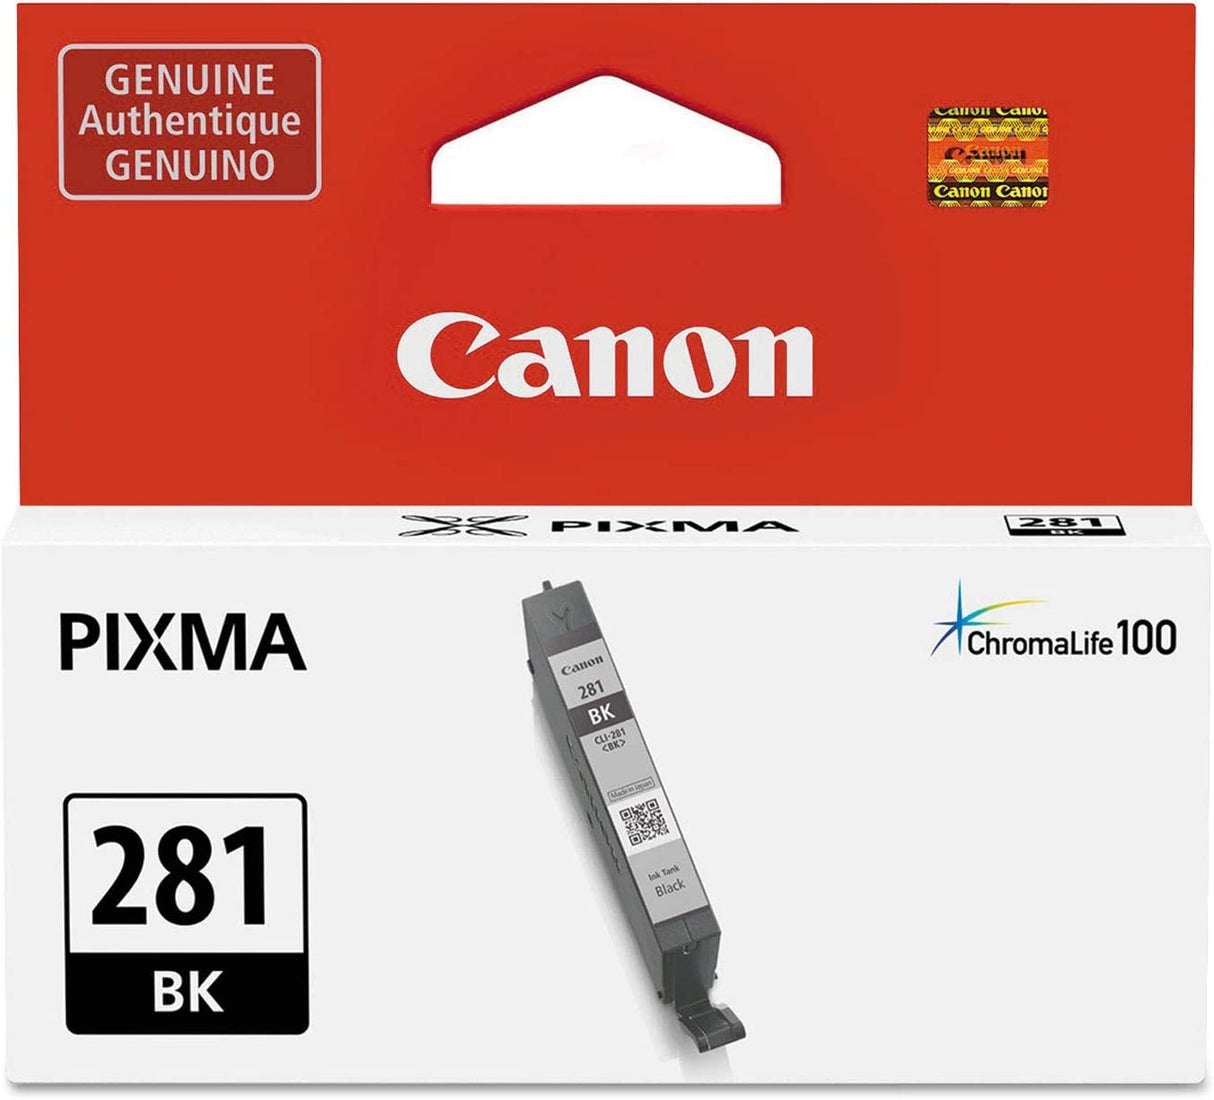 Canon CLI-281 Black Ink Tank, Compatible to TR8520, TR7520, TS9120 Series,TS8120 Series, TS6120 Series, TS9521C, TS9520, TS8220 Series, TS6220 Series Black Standard Ink